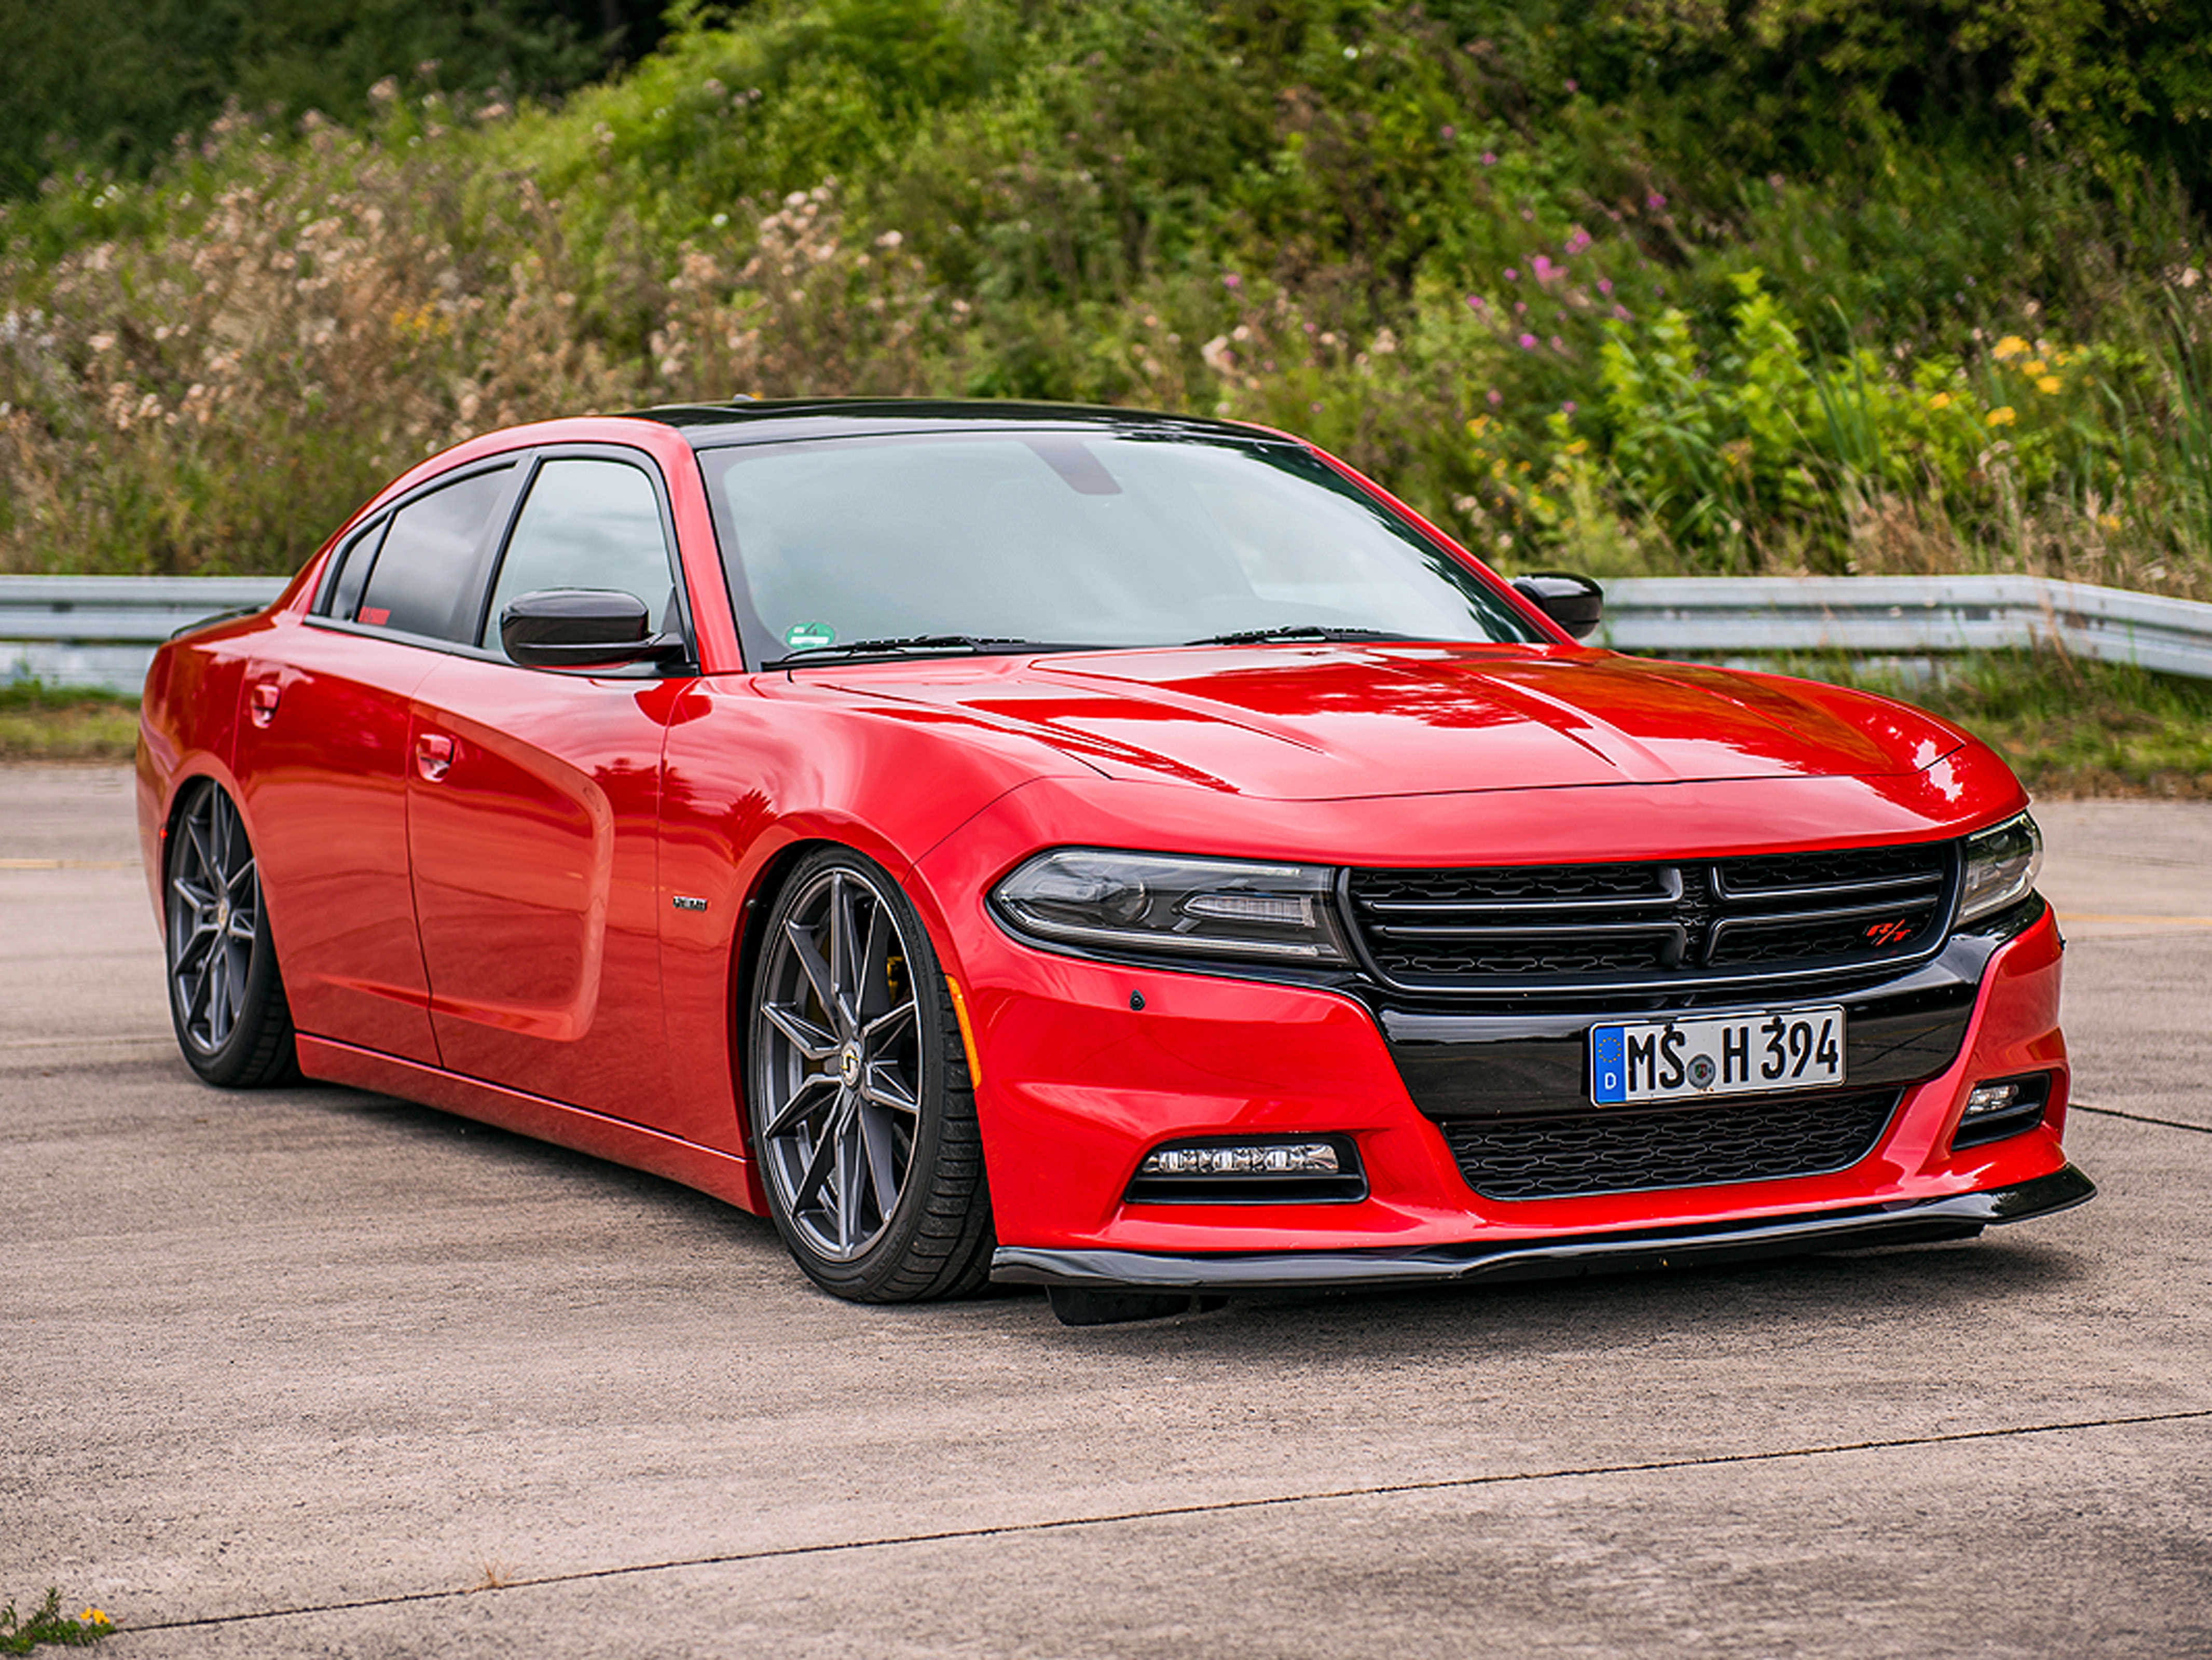 Tuning Trophy Germany (2021): Extrem tiefer Dodge Charger R/T - AUTO BILD